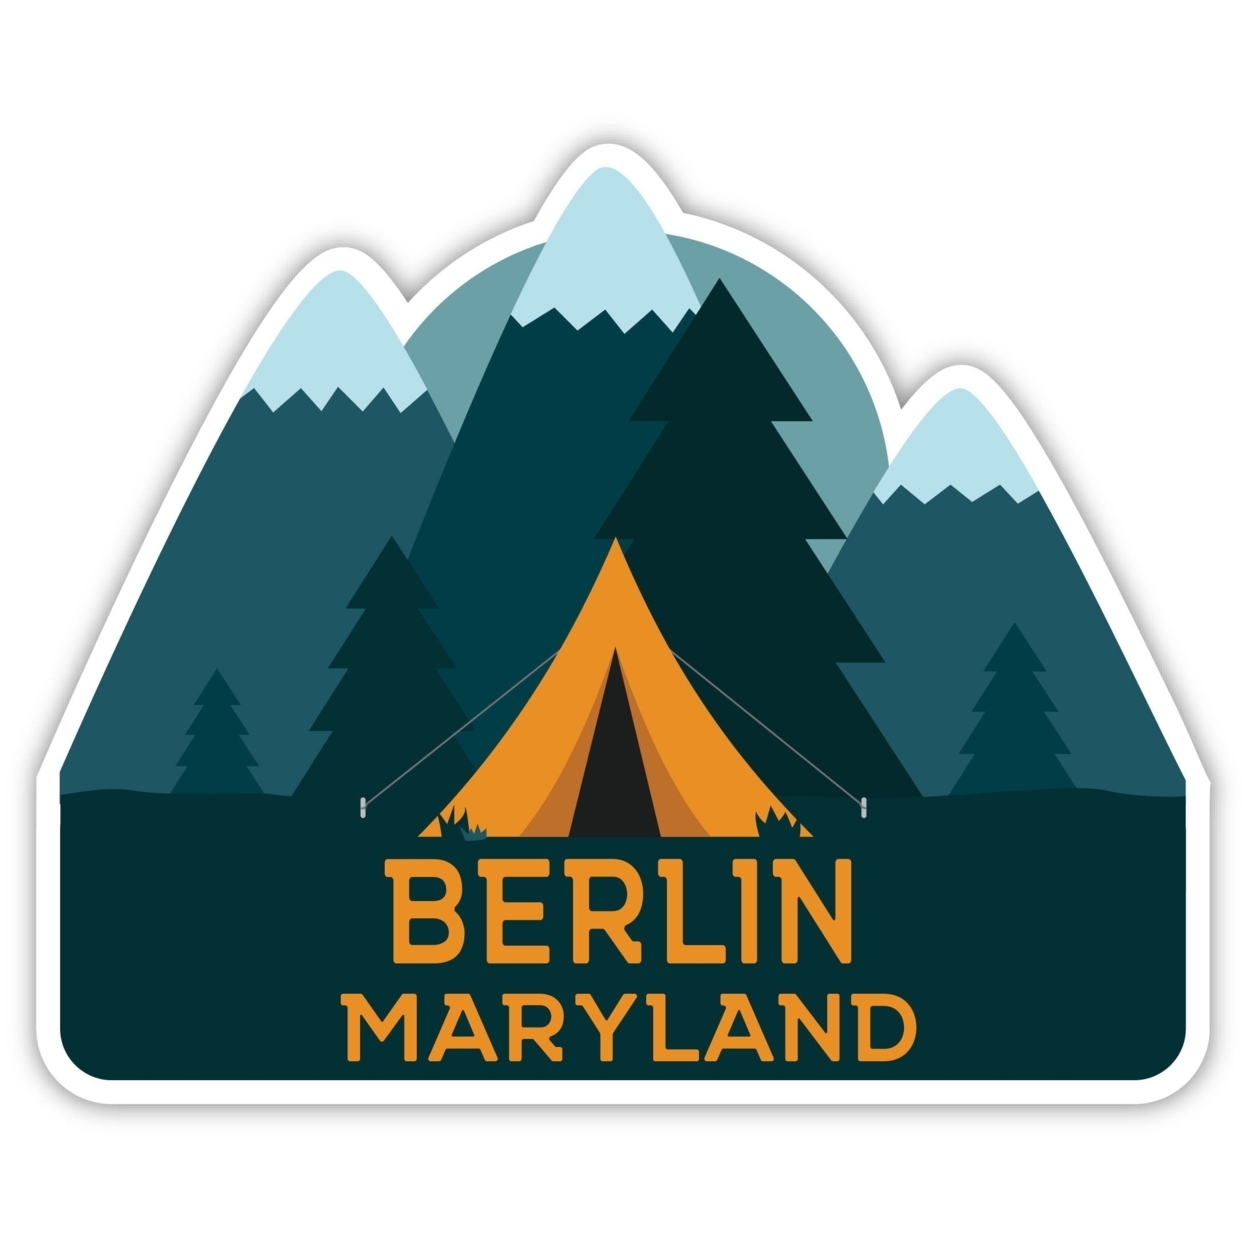 Berlin Maryland Souvenir Decorative Stickers (Choose Theme And Size) - 4-Pack, 4-Inch, Tent